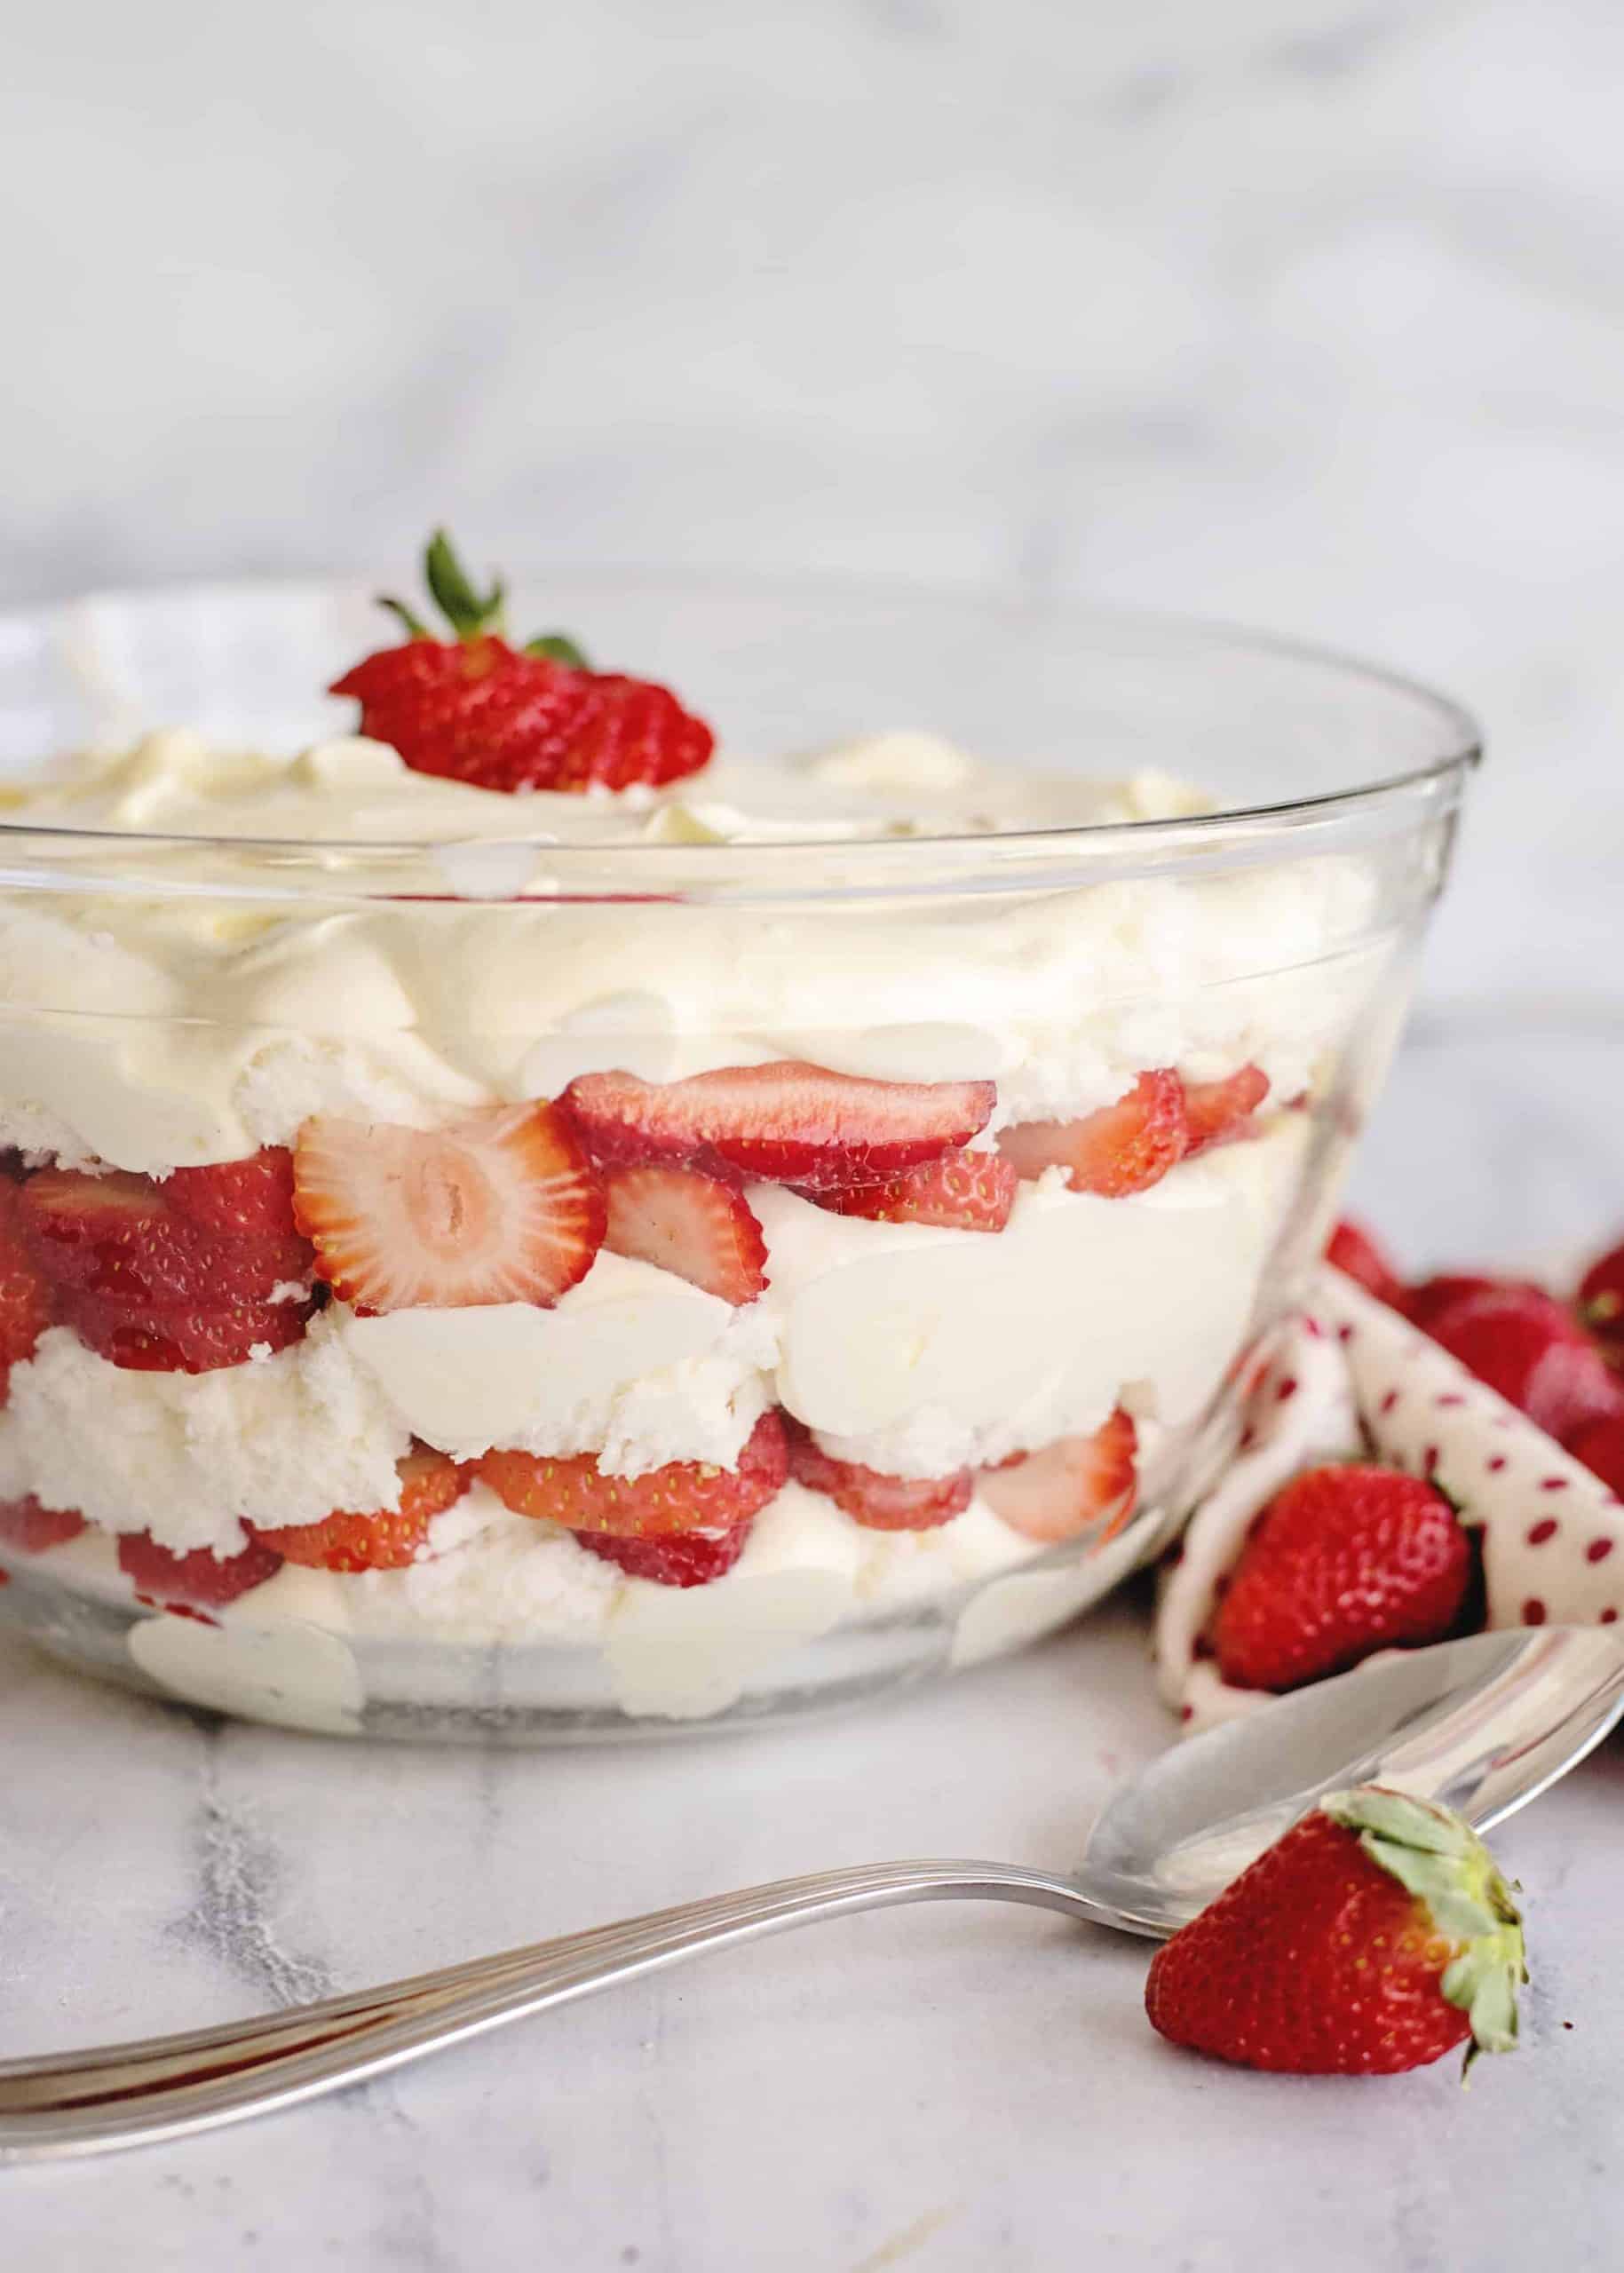 Strawberry Punch Bowl Cake (a.k.a Strawberry Trifle)